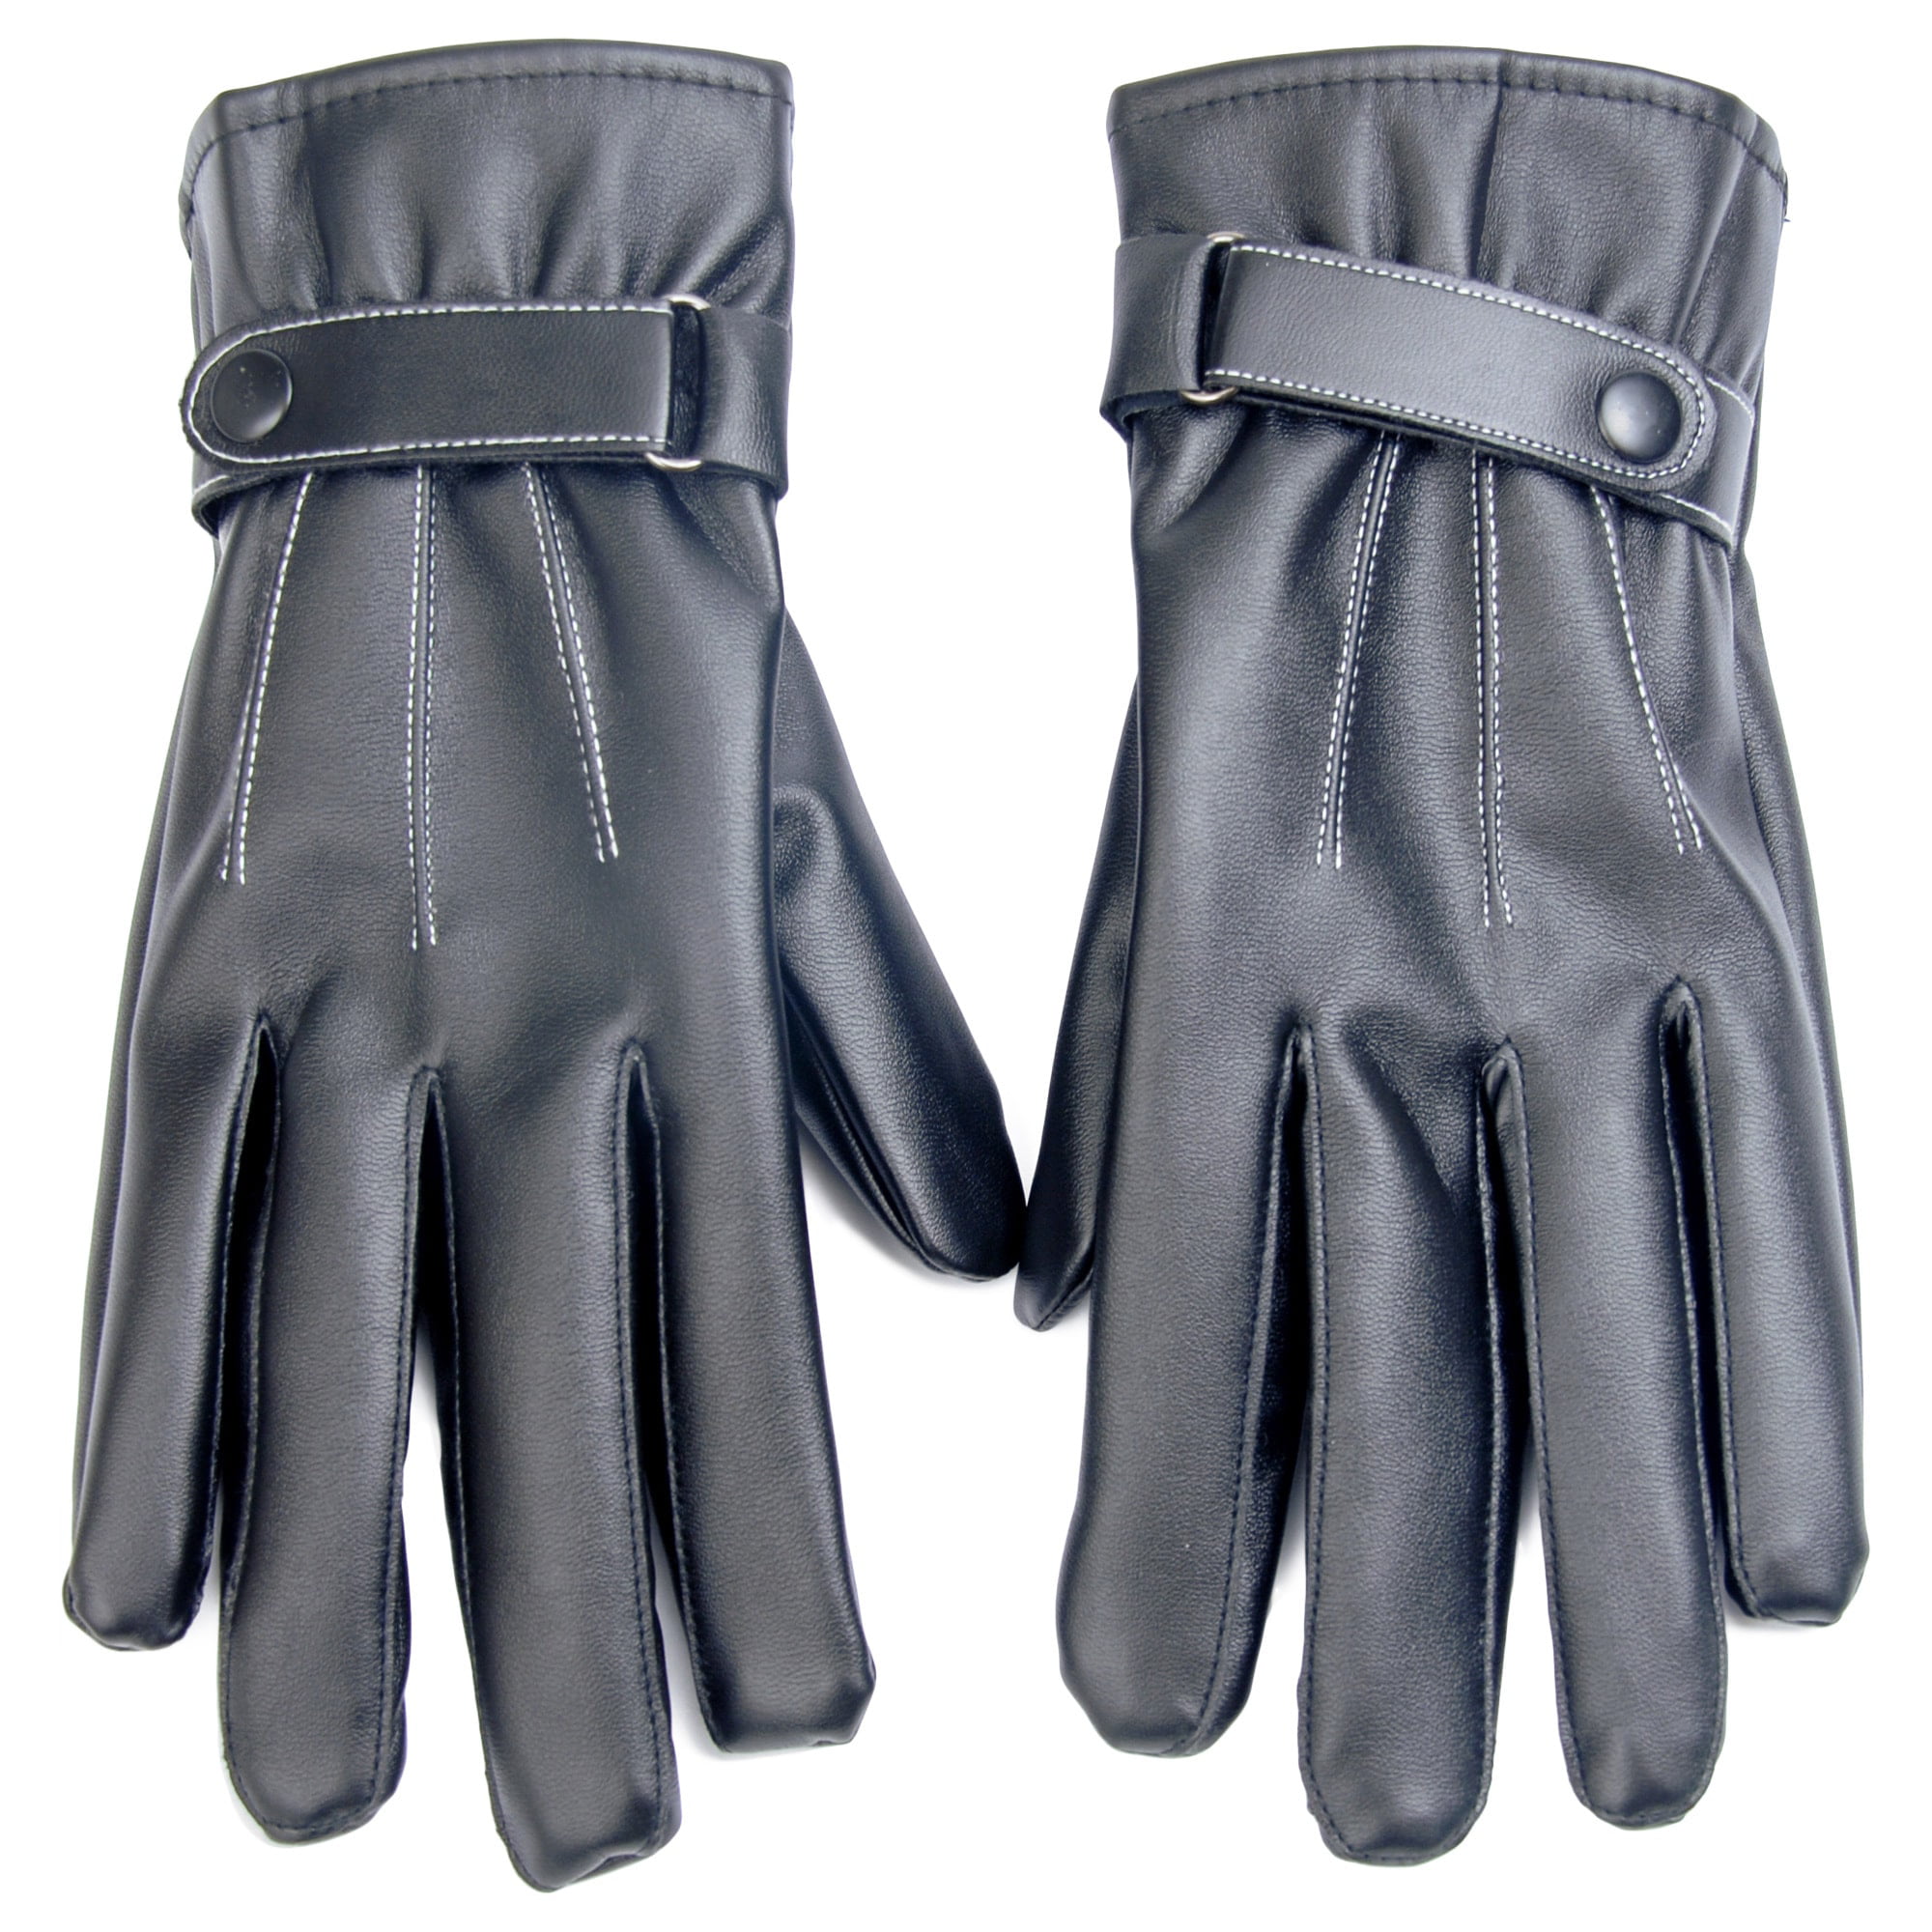 PAIR 3 Details about    Wells Lamont Grips® Ball and Tape Drivers Gloves MEDIUM GRANDE 